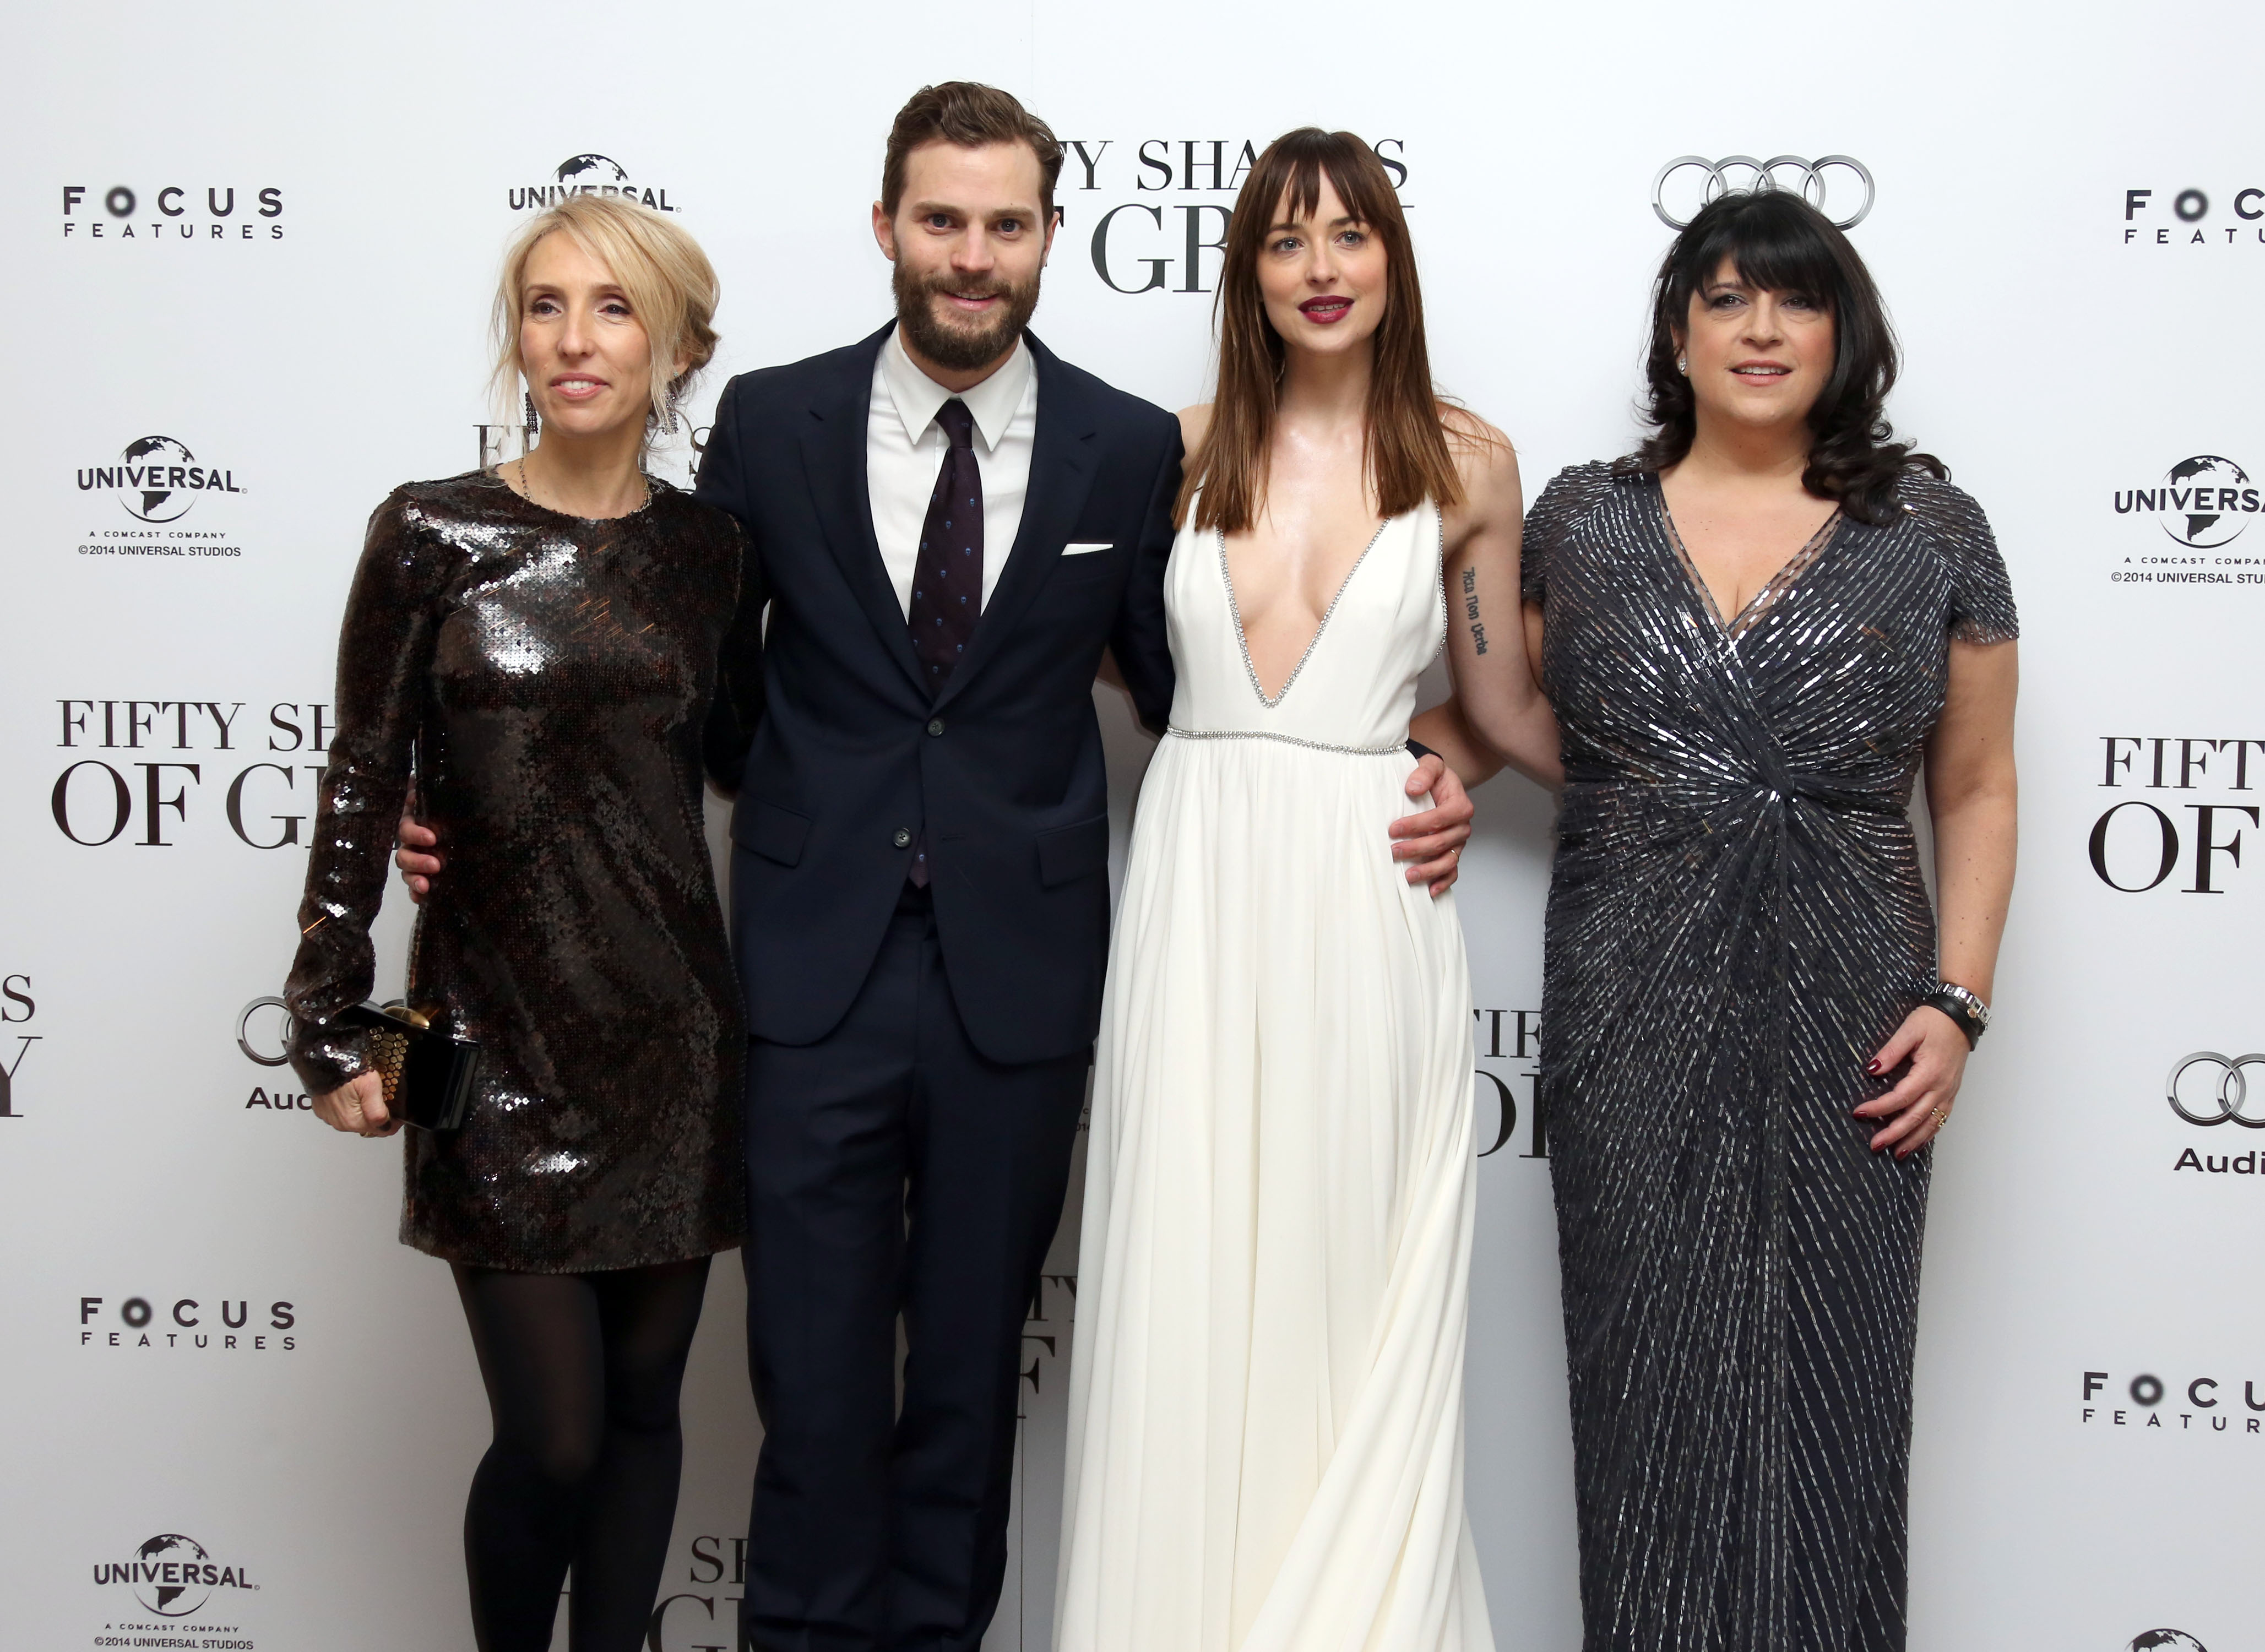 Sam Taylor-Johnson, Jamie Dornan, Dakota Johnson and E.L. James  pose for photographers upon arrival at the UK premiere of the film <i>Fifty Shades of Grey</i> in London, Feb. 12, 2015